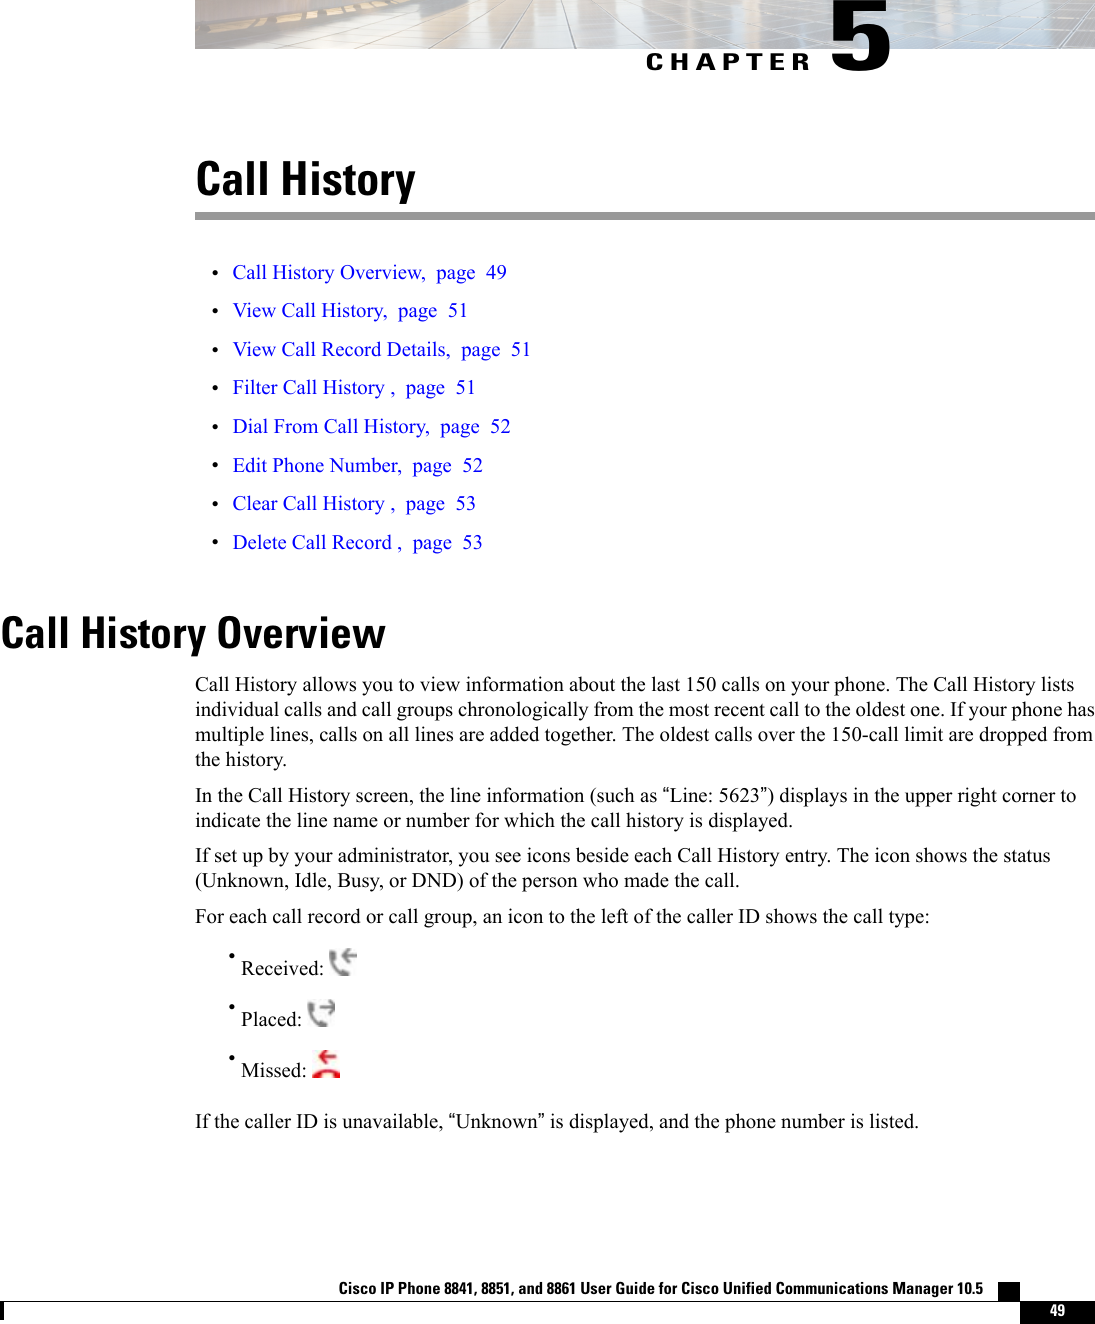 CHAPTER 5Call History•Call History Overview, page 49•View Call History, page 51•View Call Record Details, page 51•Filter Call History , page 51•Dial From Call History, page 52•Edit Phone Number, page 52•Clear Call History , page 53•Delete Call Record , page 53Call History OverviewCall History allows you to view information about the last 150 calls on your phone. The Call History listsindividual calls and call groups chronologically from the most recent call to the oldest one. If your phone hasmultiple lines, calls on all lines are added together. The oldest calls over the 150-call limit are dropped fromthe history.In the Call History screen, the line information (such as “Line: 5623”) displays in the upper right corner toindicate the line name or number for which the call history is displayed.If set up by your administrator, you see icons beside each Call History entry. The icon shows the status(Unknown, Idle, Busy, or DND) of the person who made the call.For each call record or call group, an icon to the left of the caller ID shows the call type:•Received:•Placed:•Missed:If the caller ID is unavailable, “Unknown”is displayed, and the phone number is listed.Cisco IP Phone 8841, 8851, and 8861 User Guide for Cisco Unified Communications Manager 10.5    49